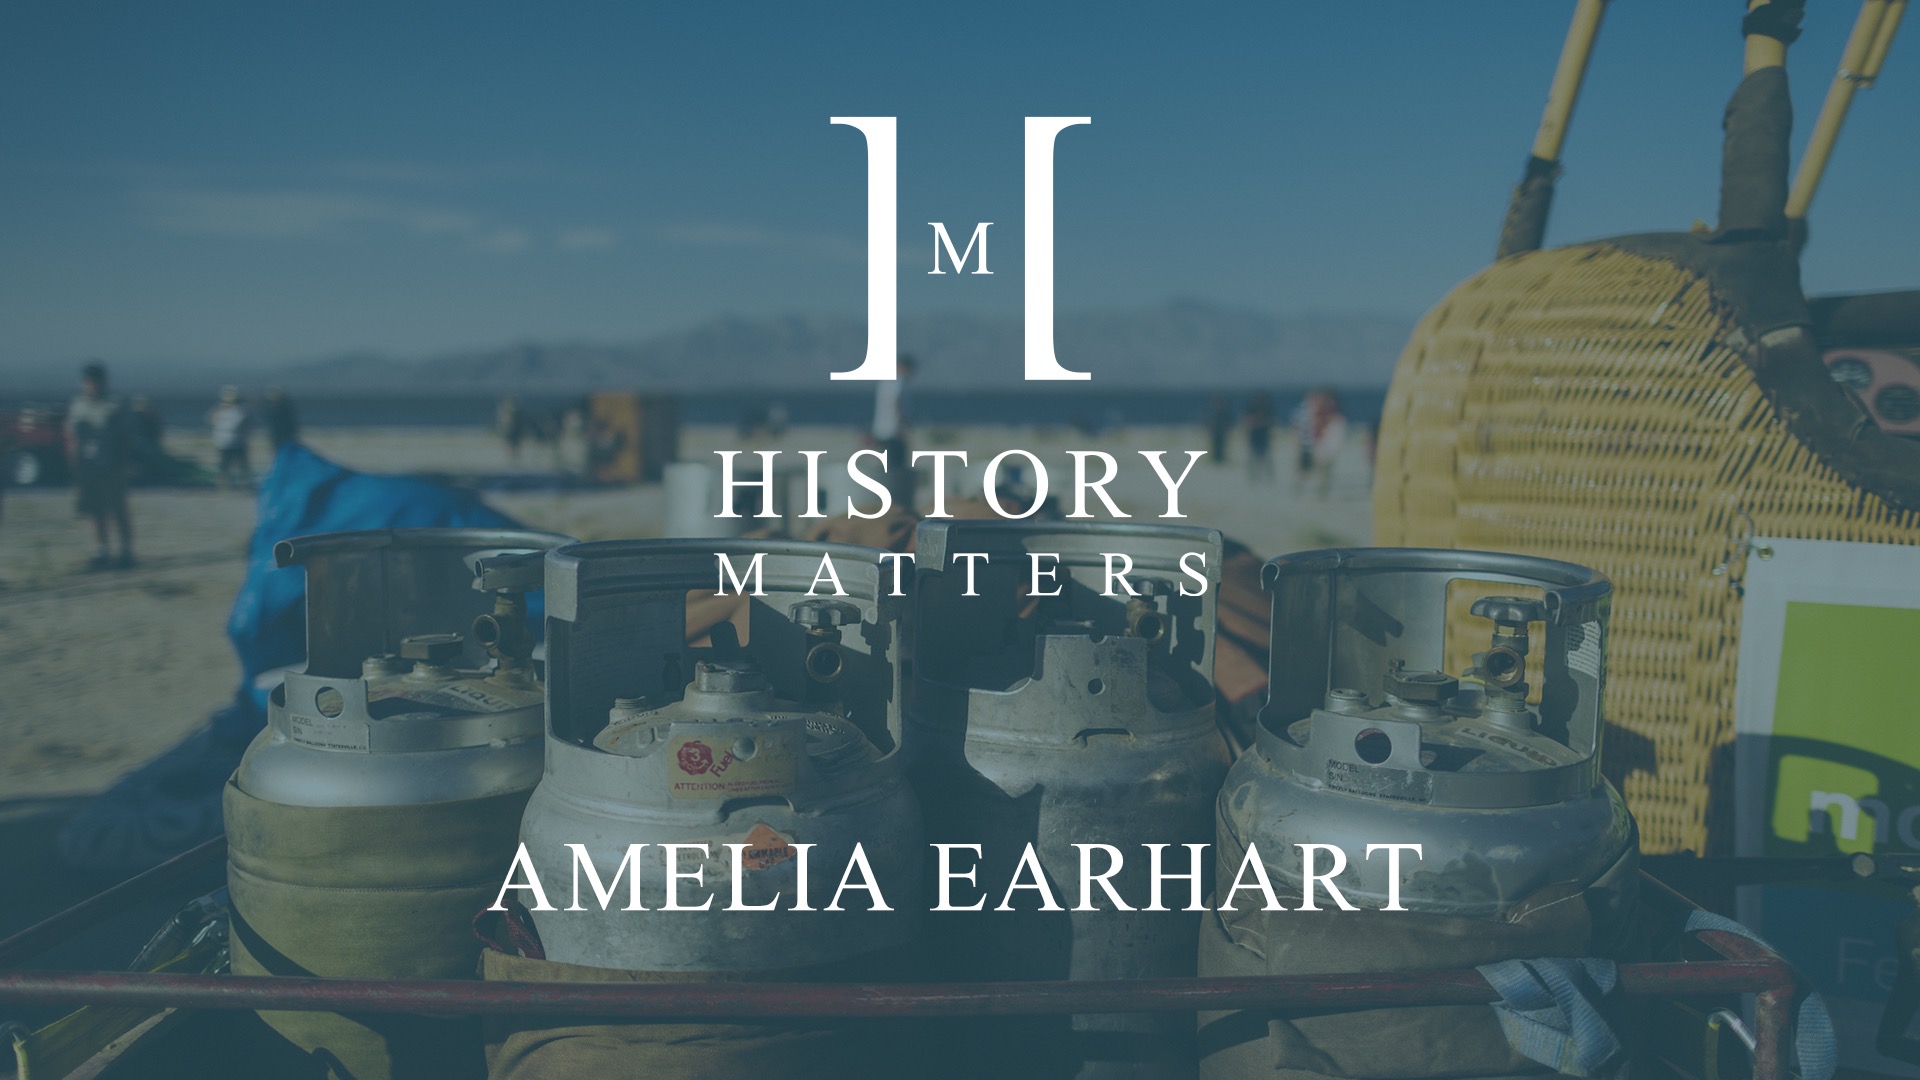 IU C&I Studios Page White HM Amelia Earhart logo with background of four fuel metal cannisters by a hot air balloon